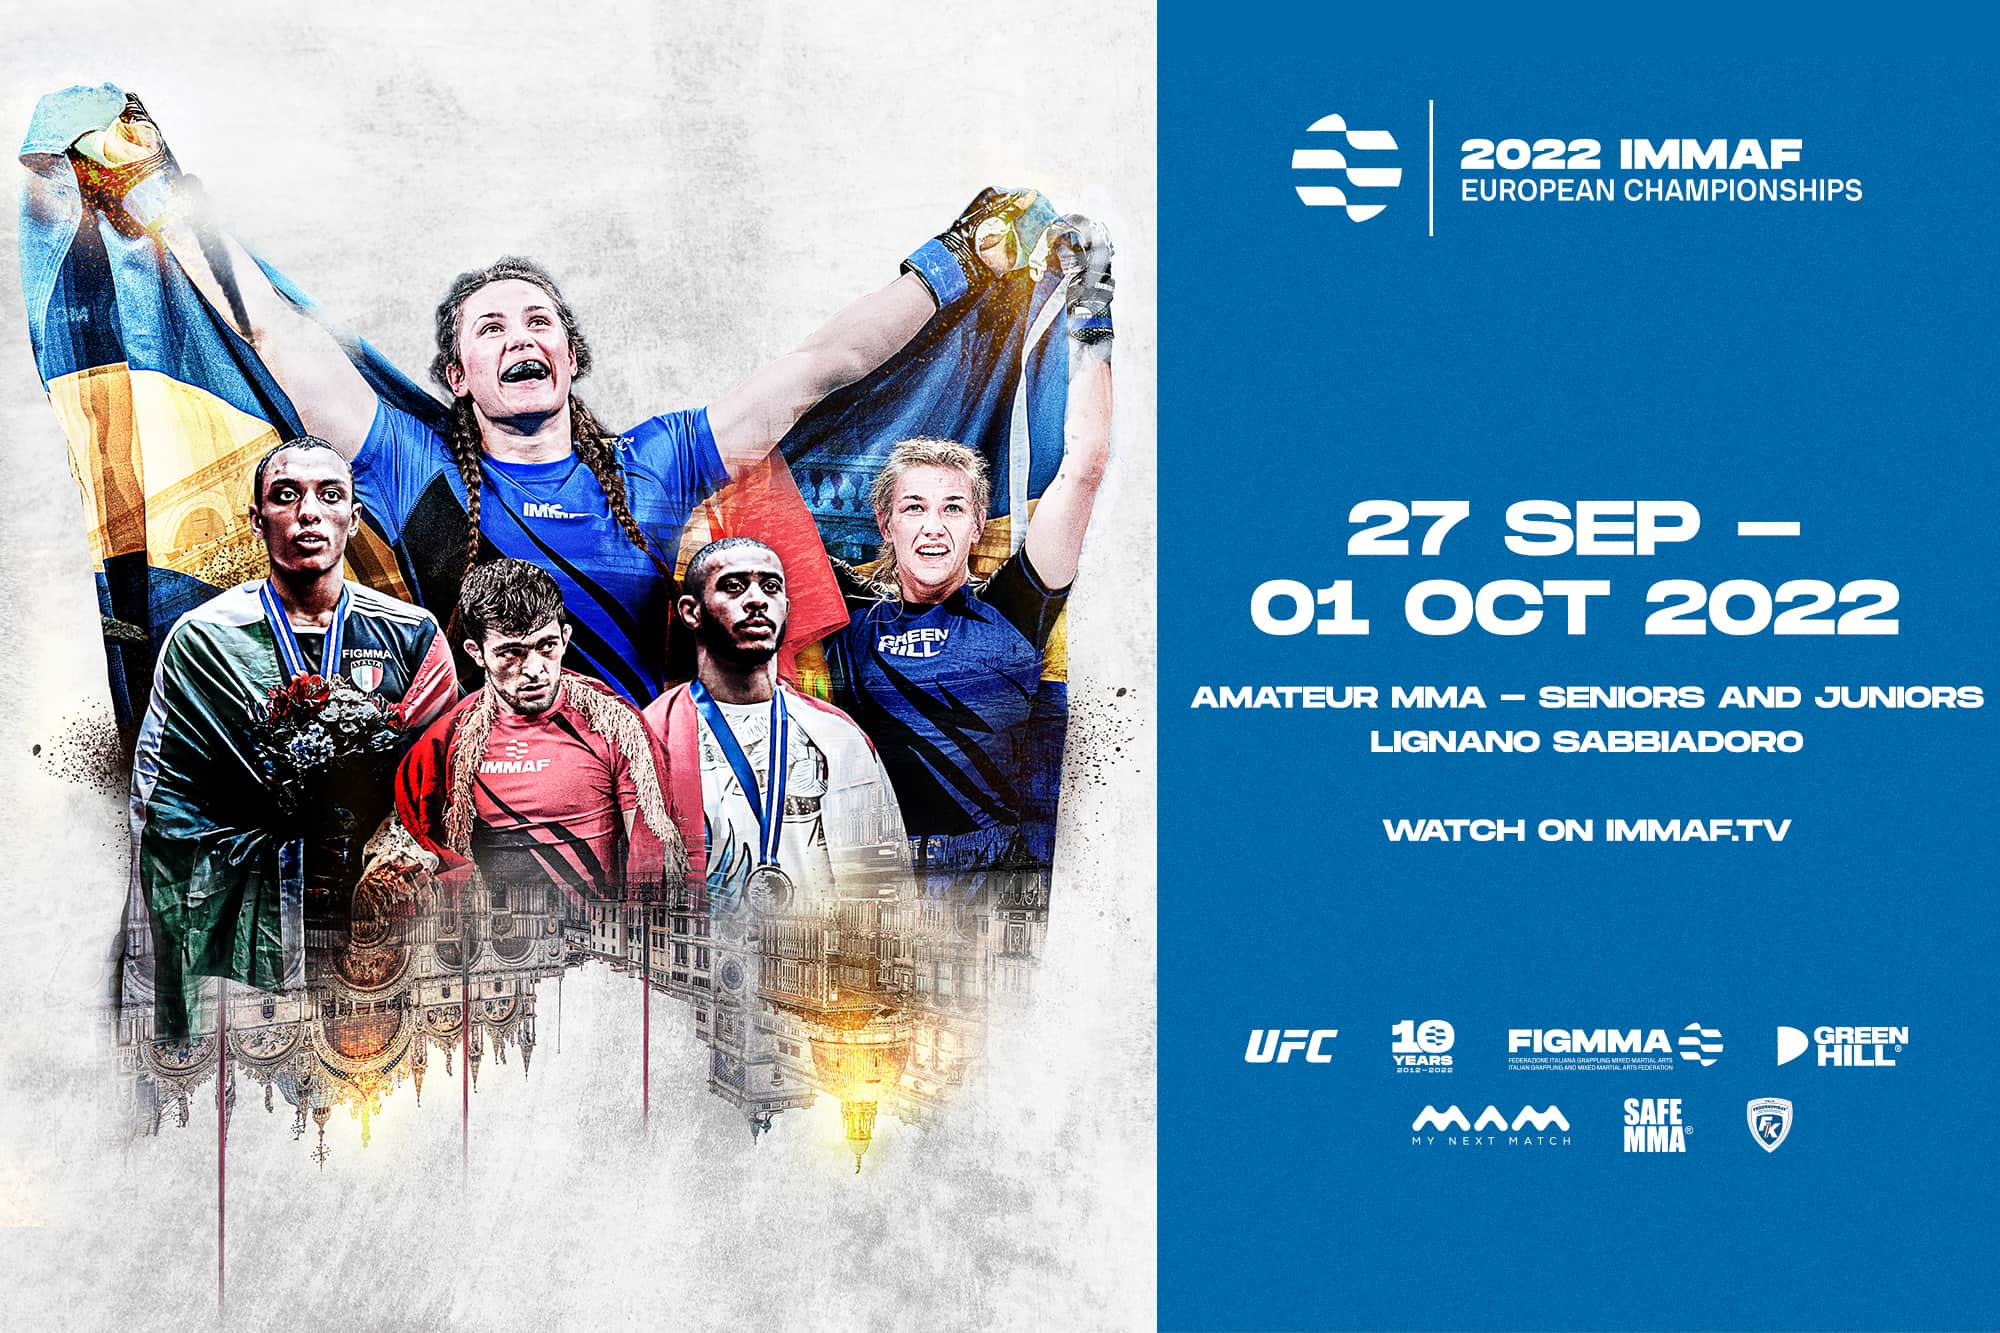 Watch the 2022 IMMAF Euros live at IMMAF.TV